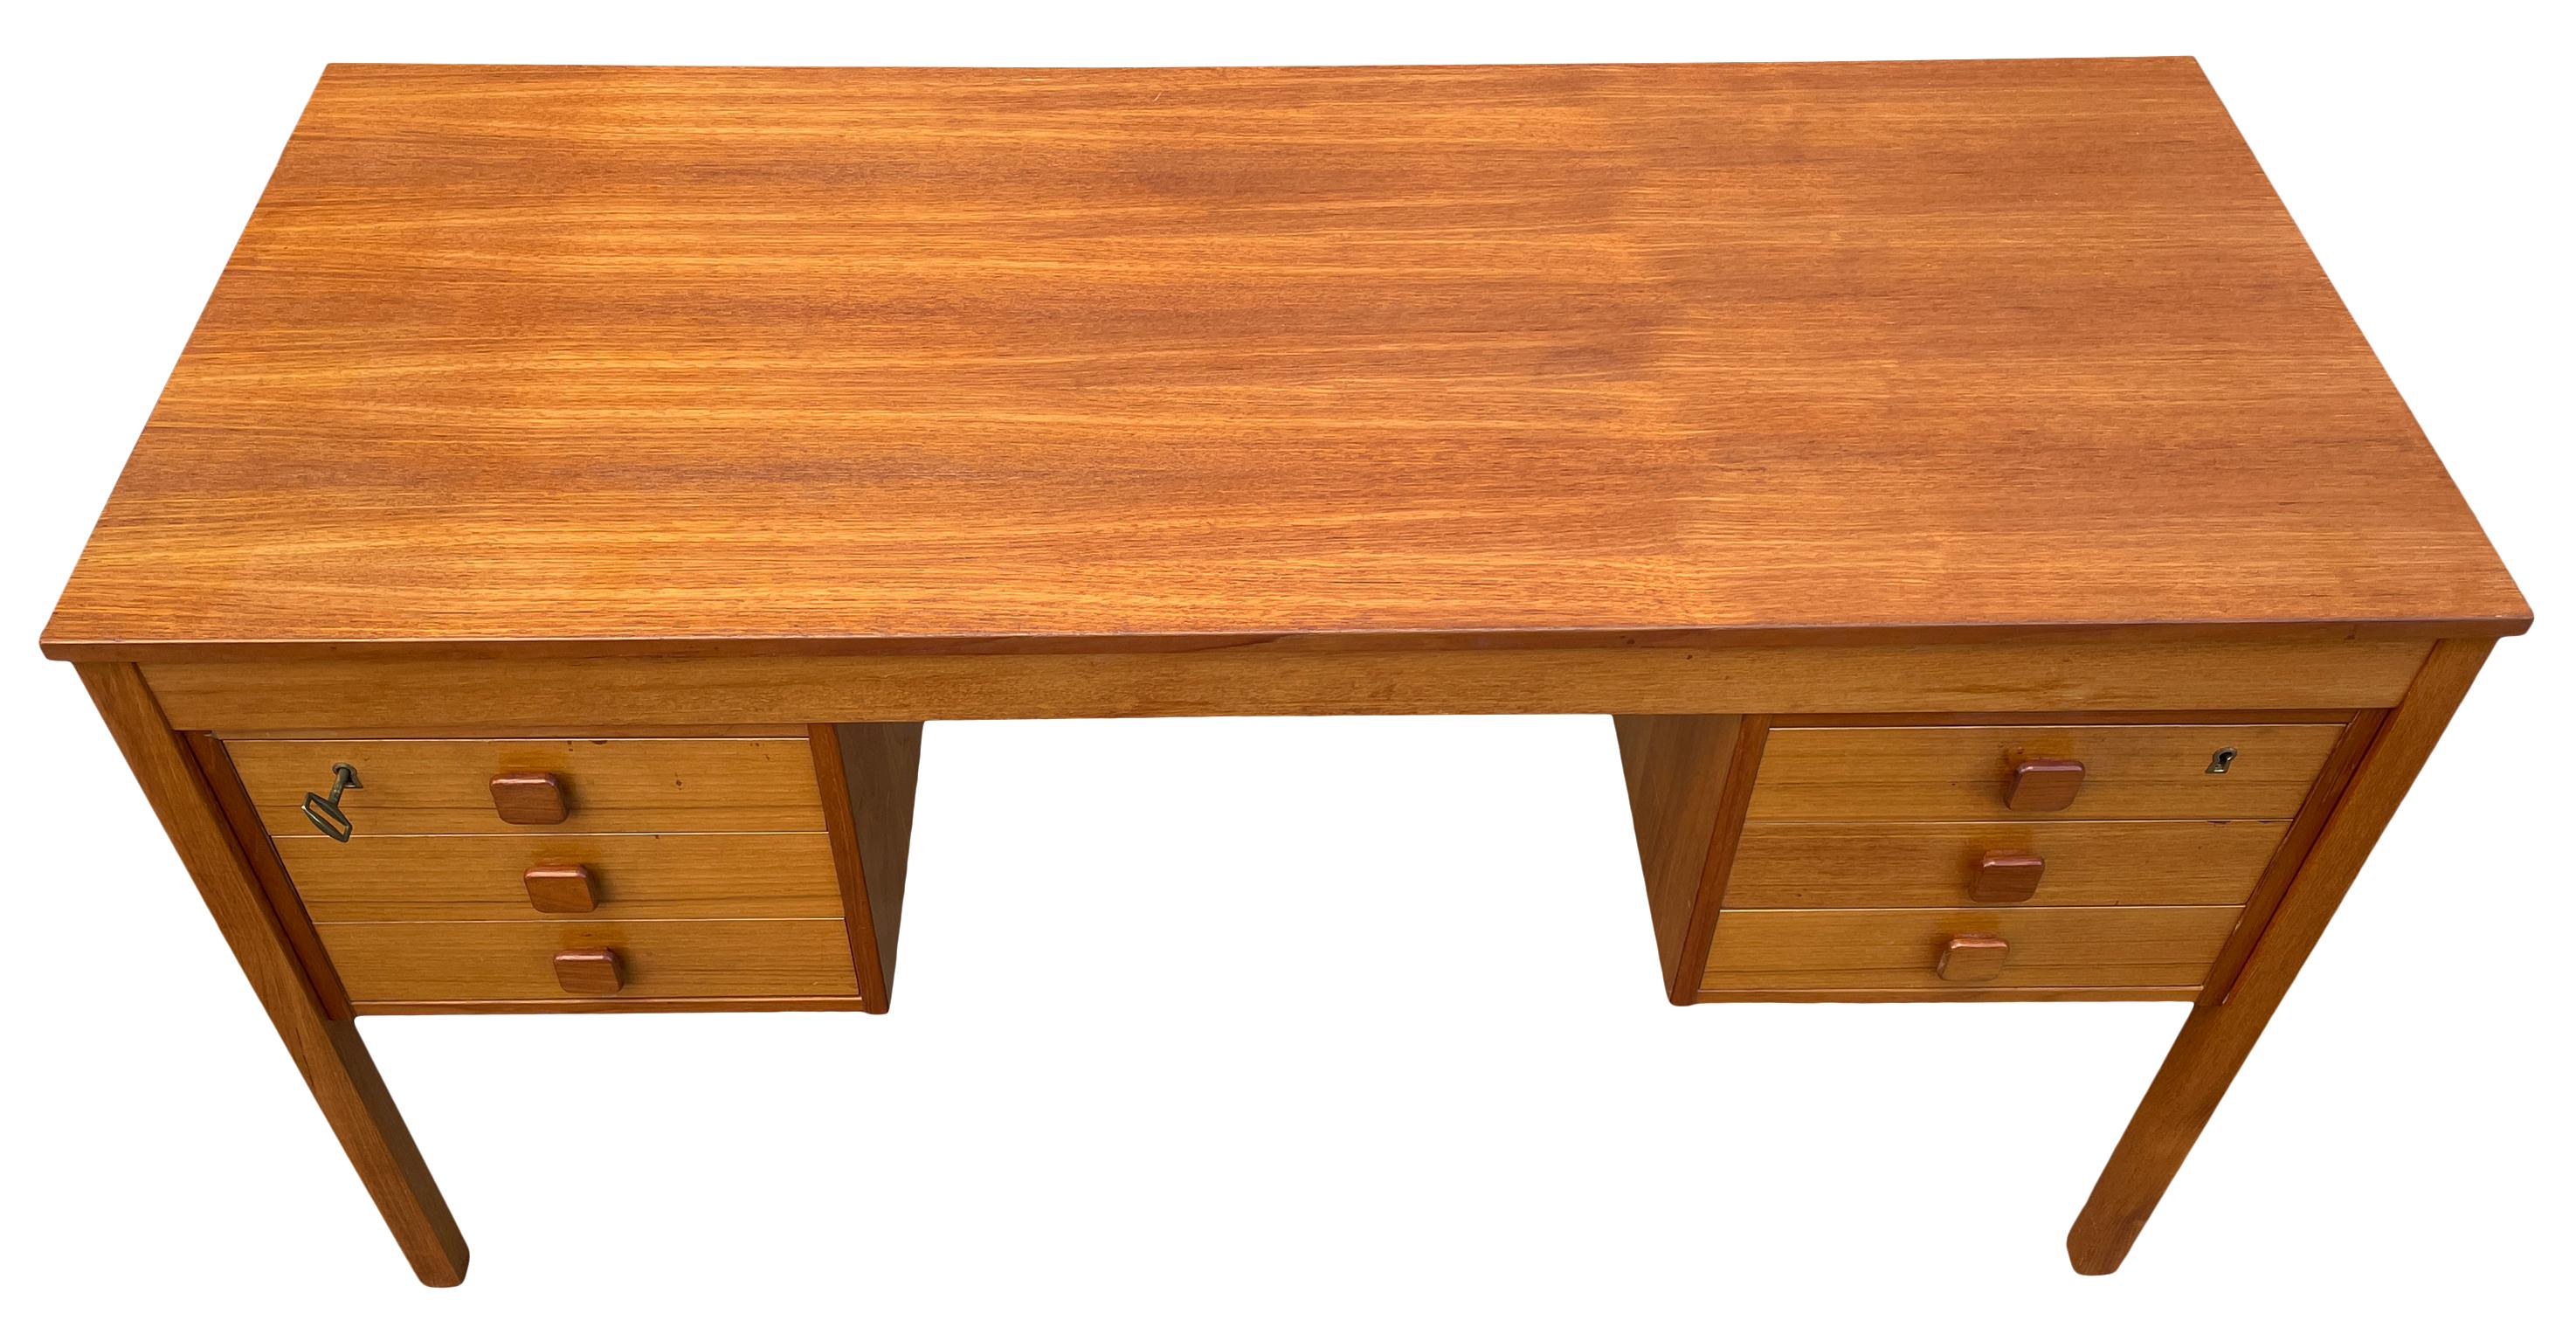 Great Medium sized mid century Danish modern light teak desk with 6 drawers with wooden pulls. Danish compact design. No labels, made in Denmark. Top 2 drawers has original Key - Lockable. Located in Brooklyn NYC.